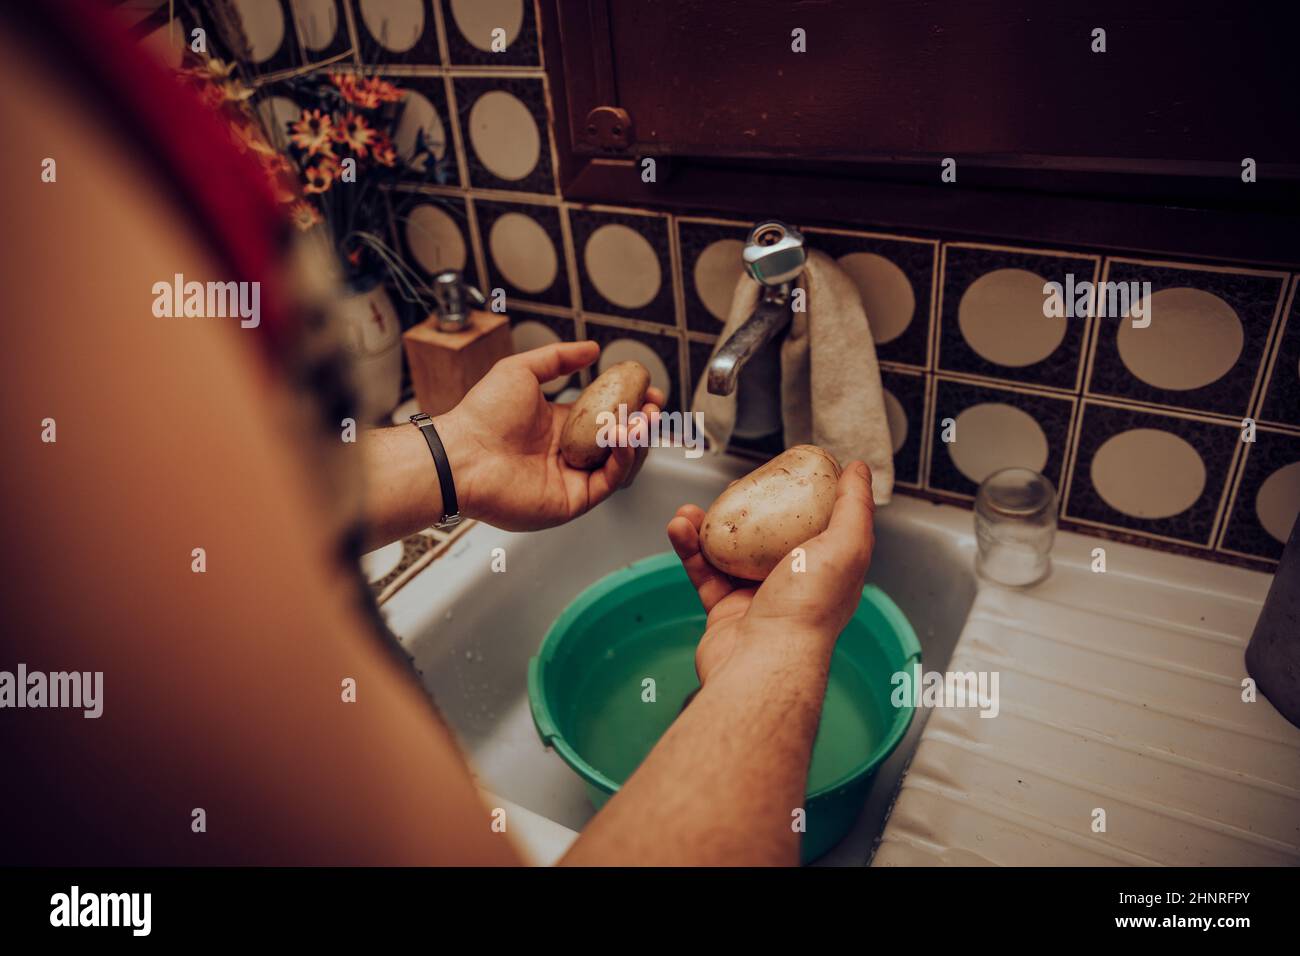 Hands washing potatoes in sink Stock Photo